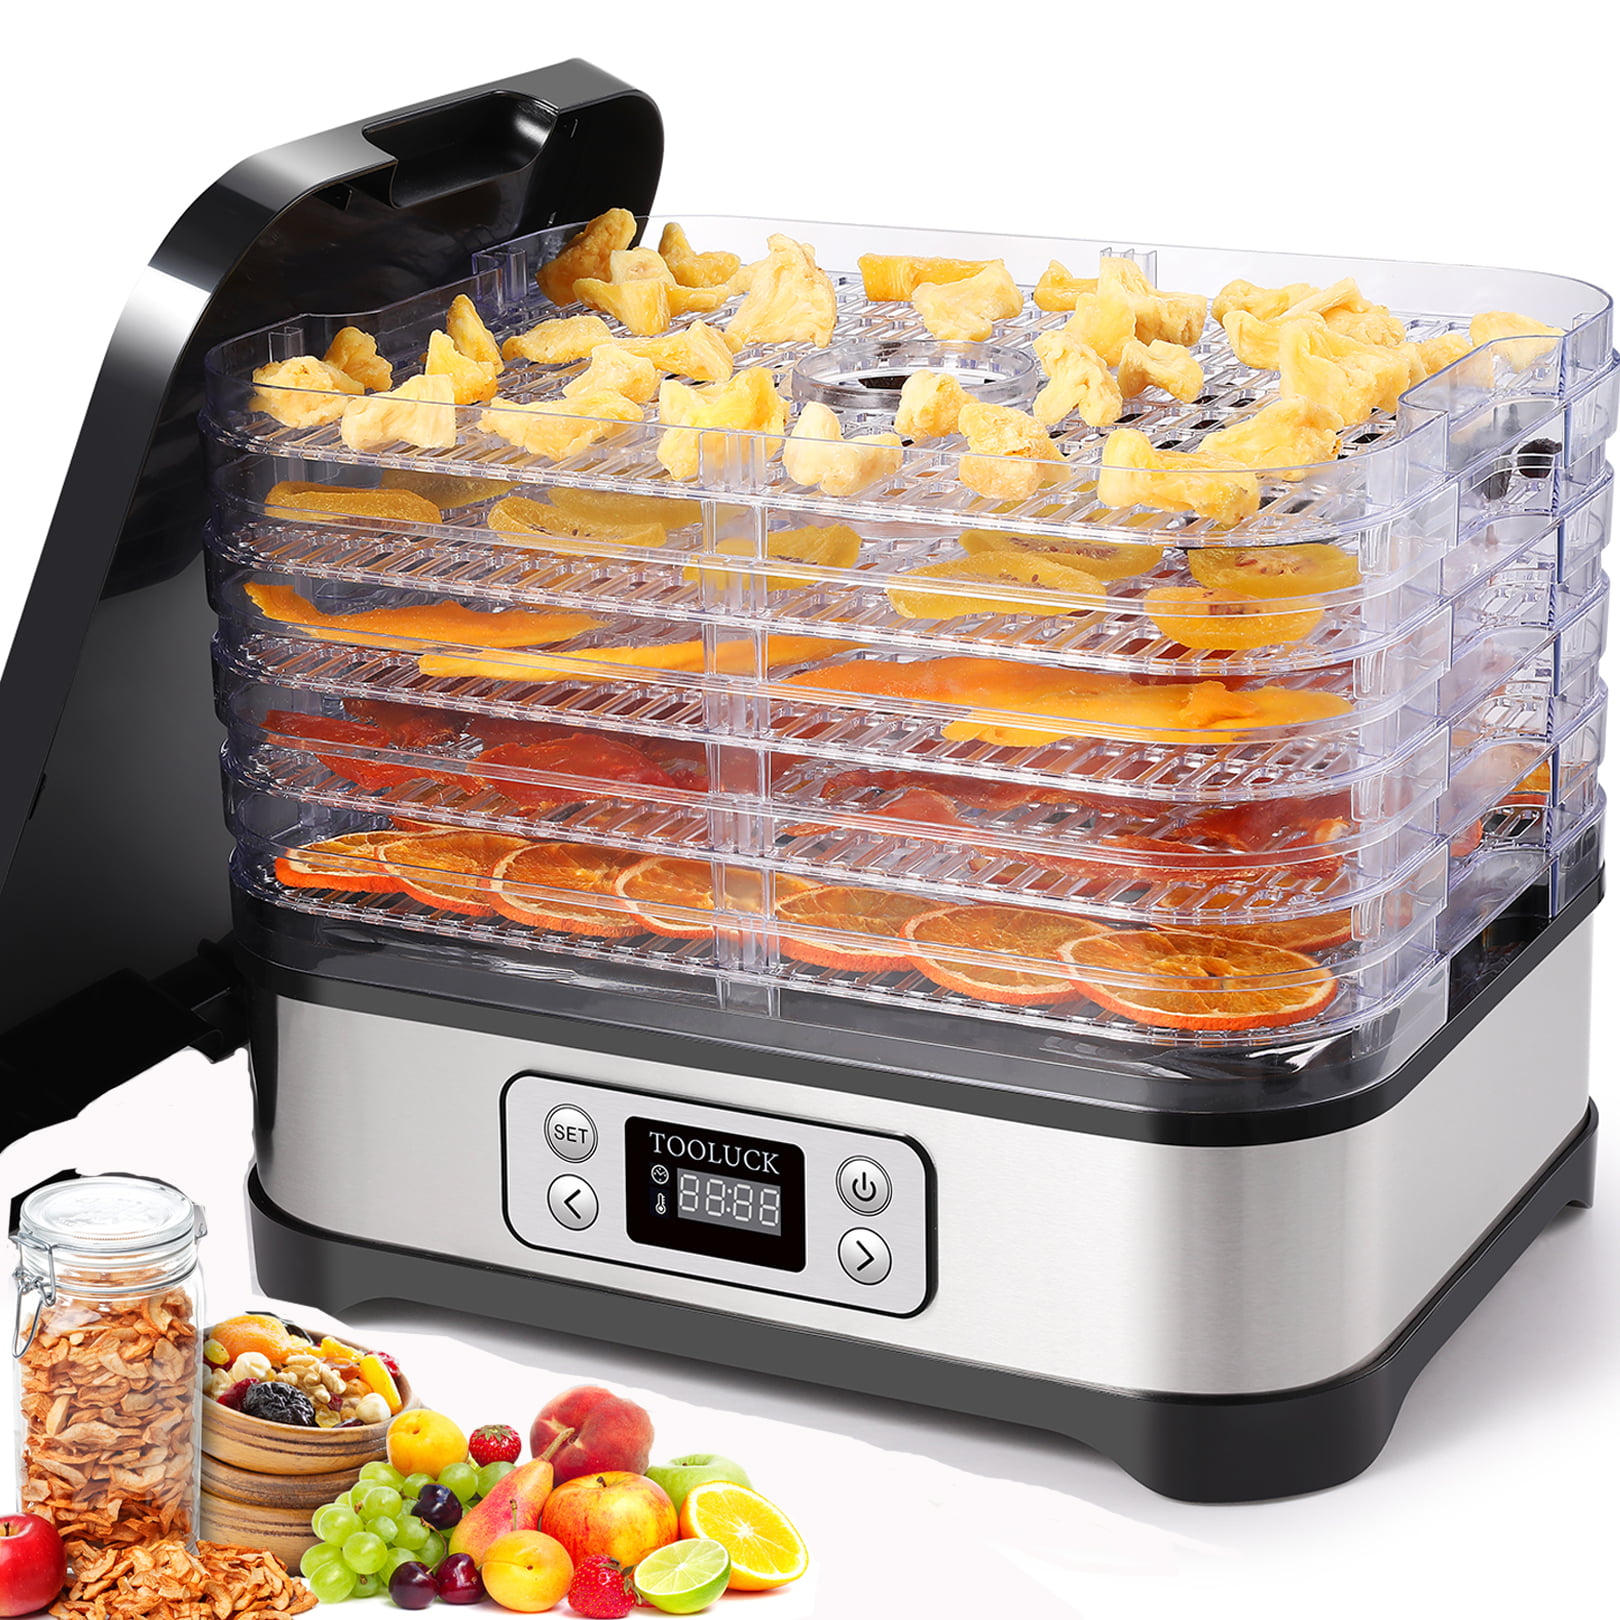 Details about   5 8 Trays Electric Food Dehydrator Machine Home Fruit Jerky Beef Meat Dryer e 68 